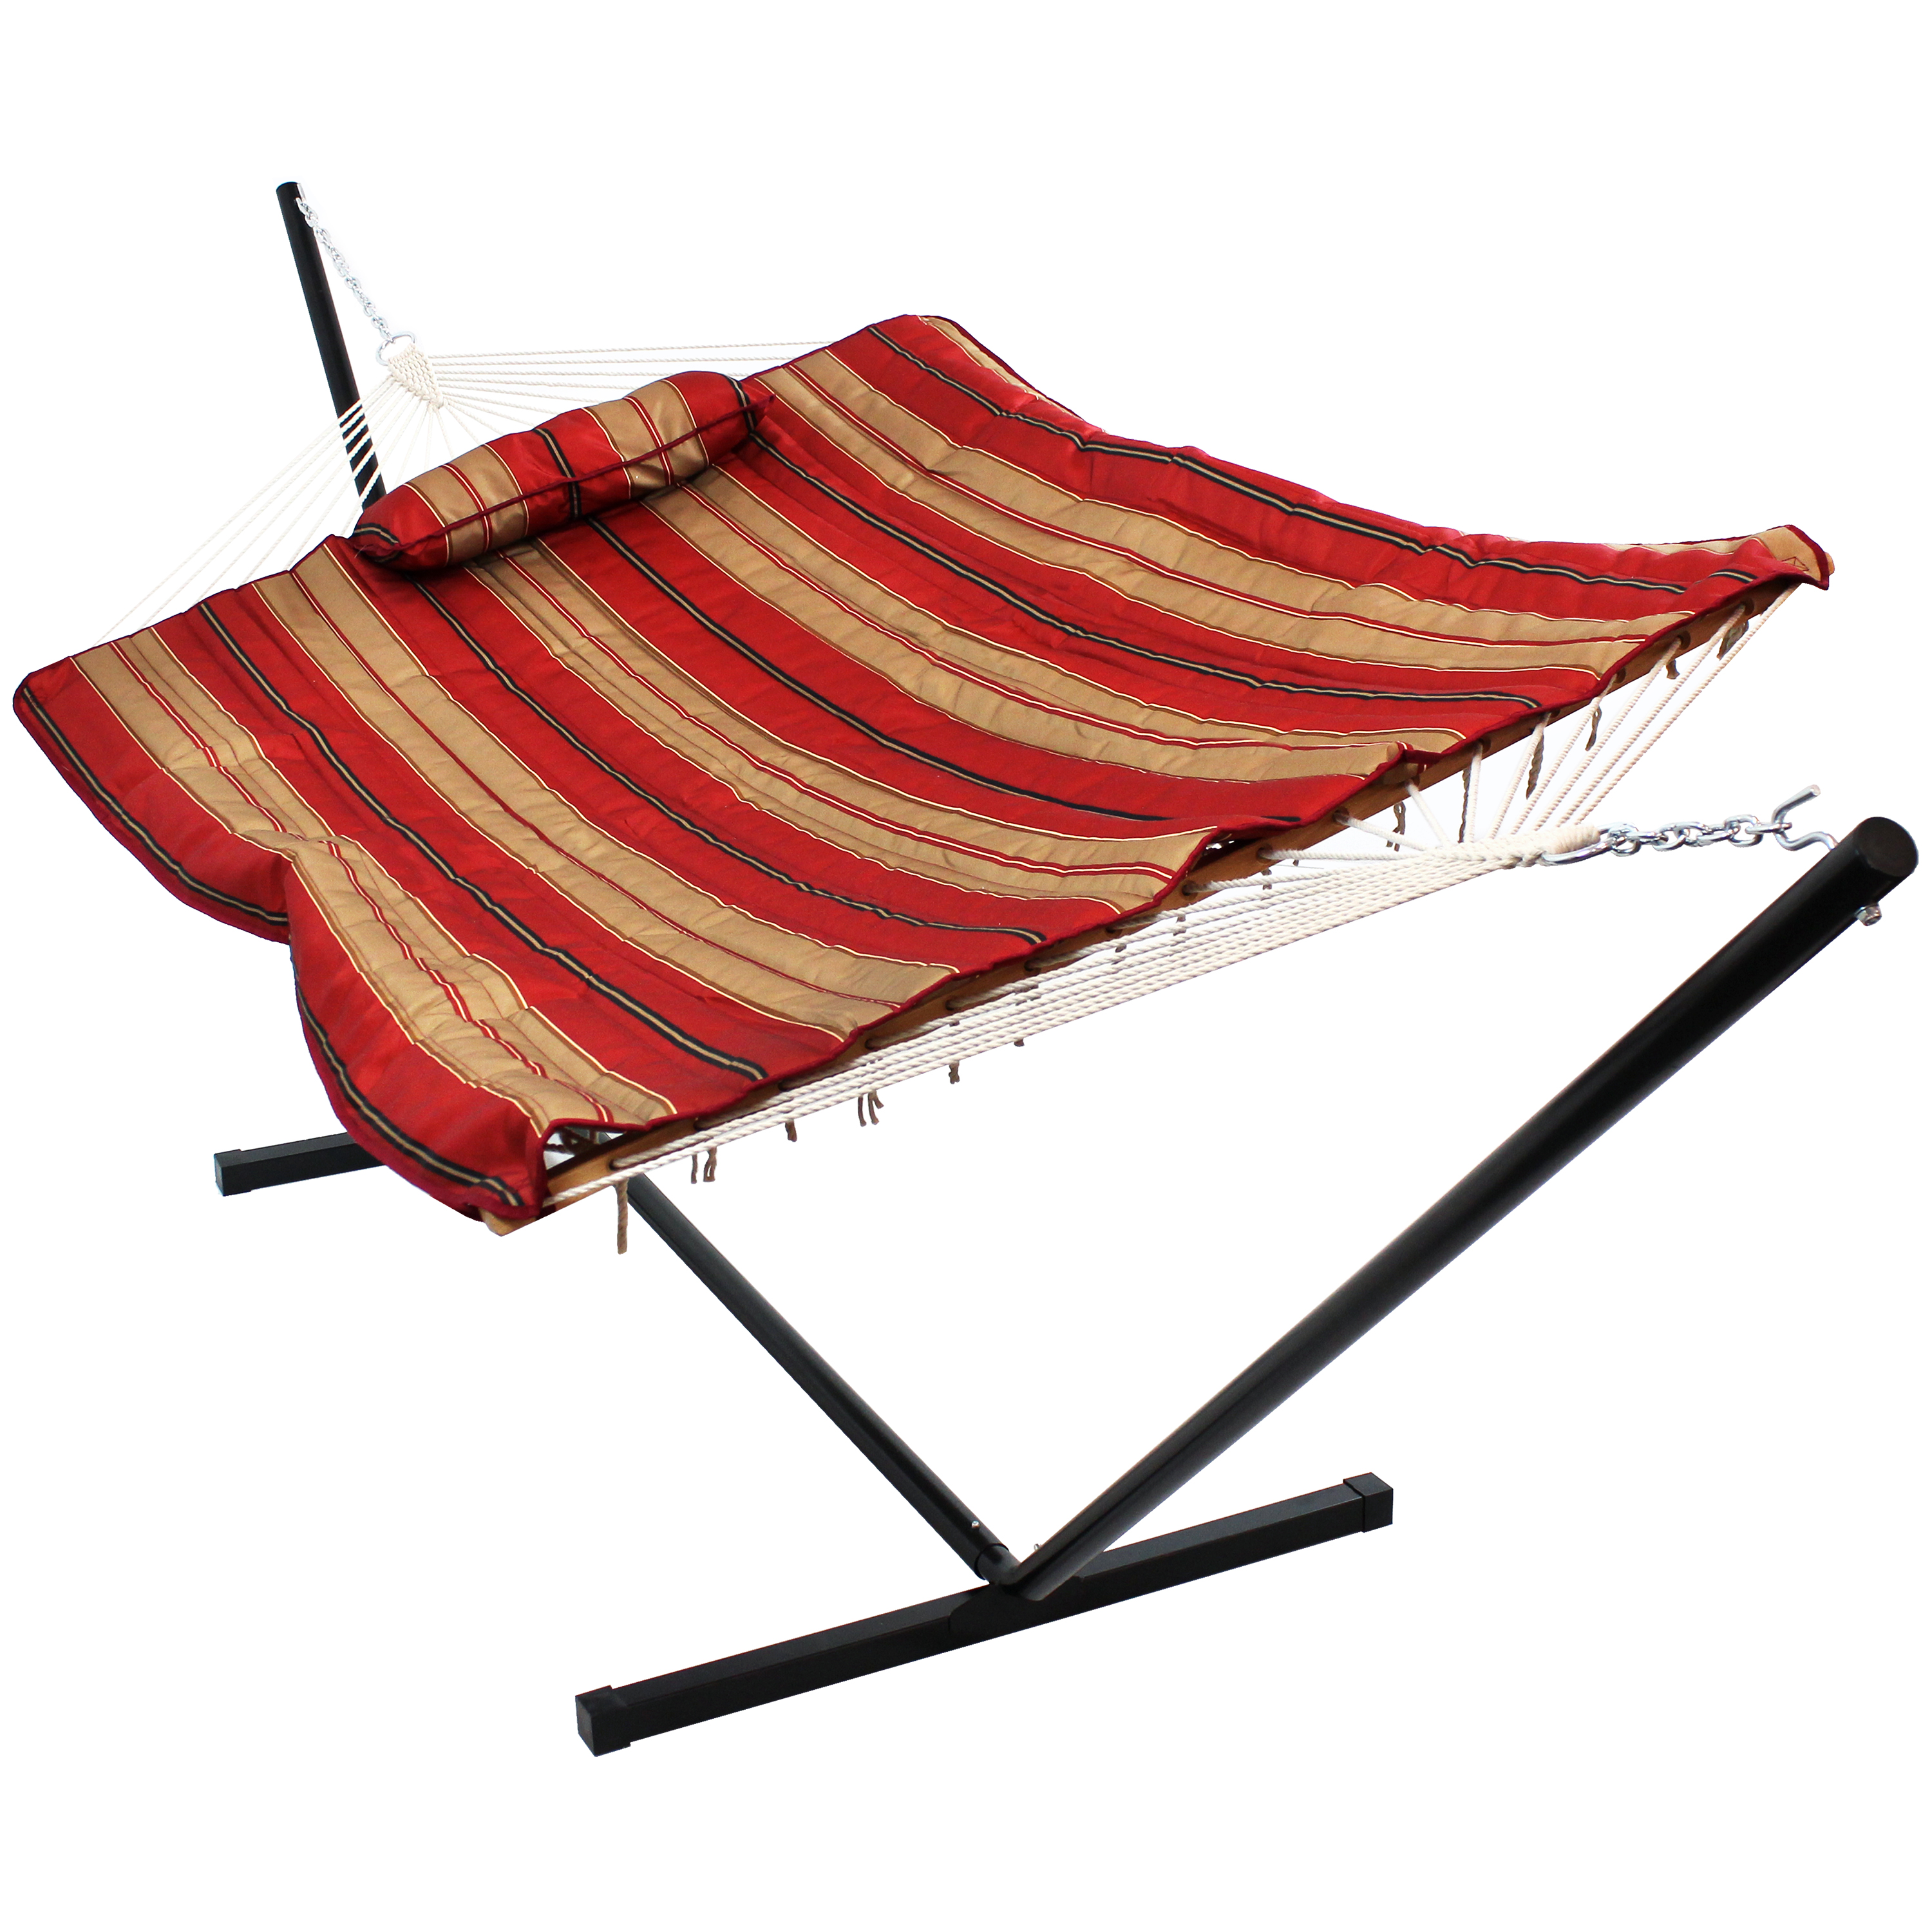 Sunnydaze Cotton Rope Hammock with 12 Foot Steel Stand, Pad and Pillow, 275 Pound Capacity, Awning Stripe